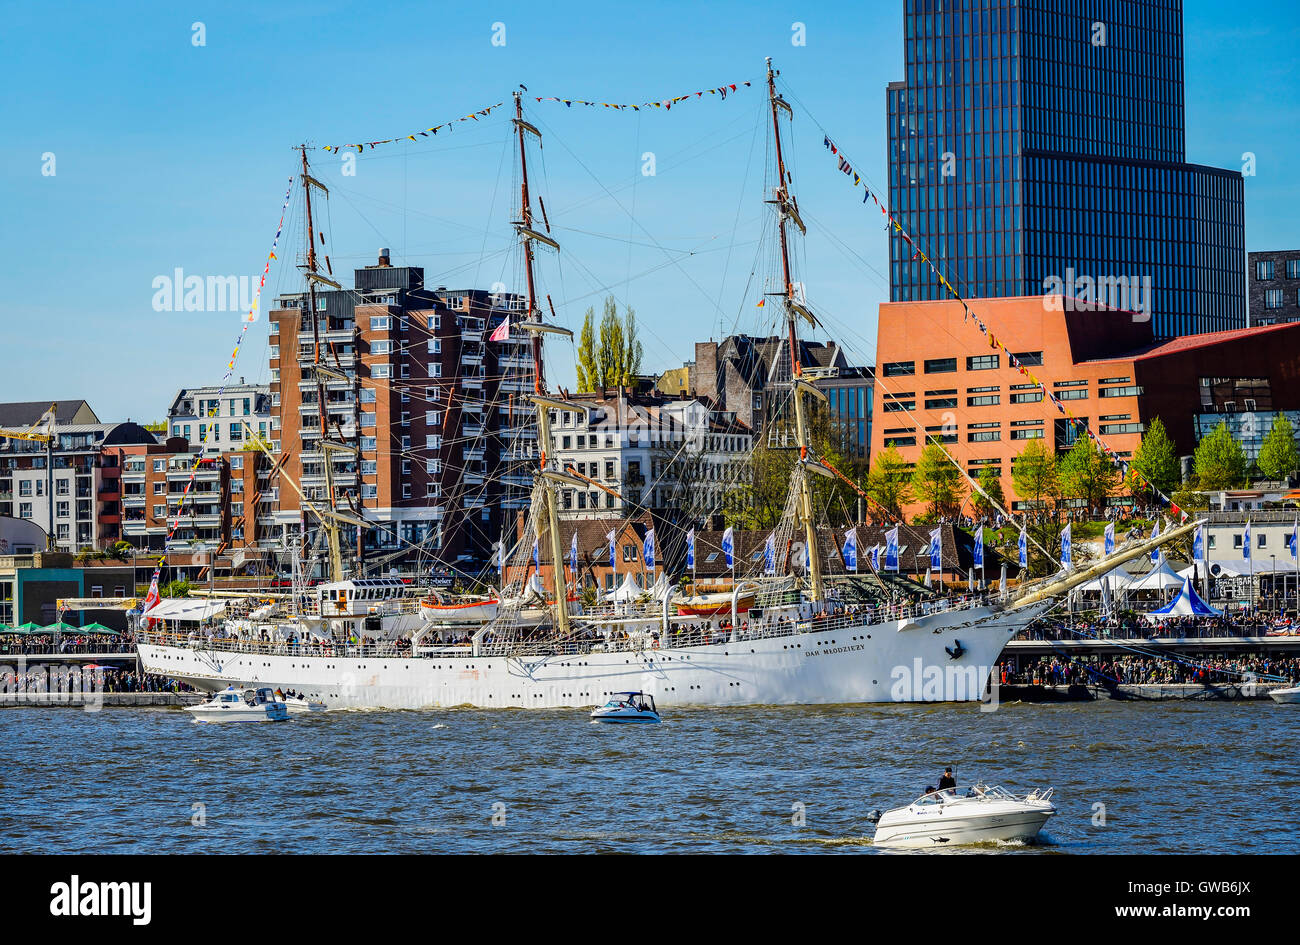 The Polish sail school ship Mlodziezy for the harbour birthday in the Hamburg harbour, Germany, Europe, Das polnische Segelschul Stock Photo